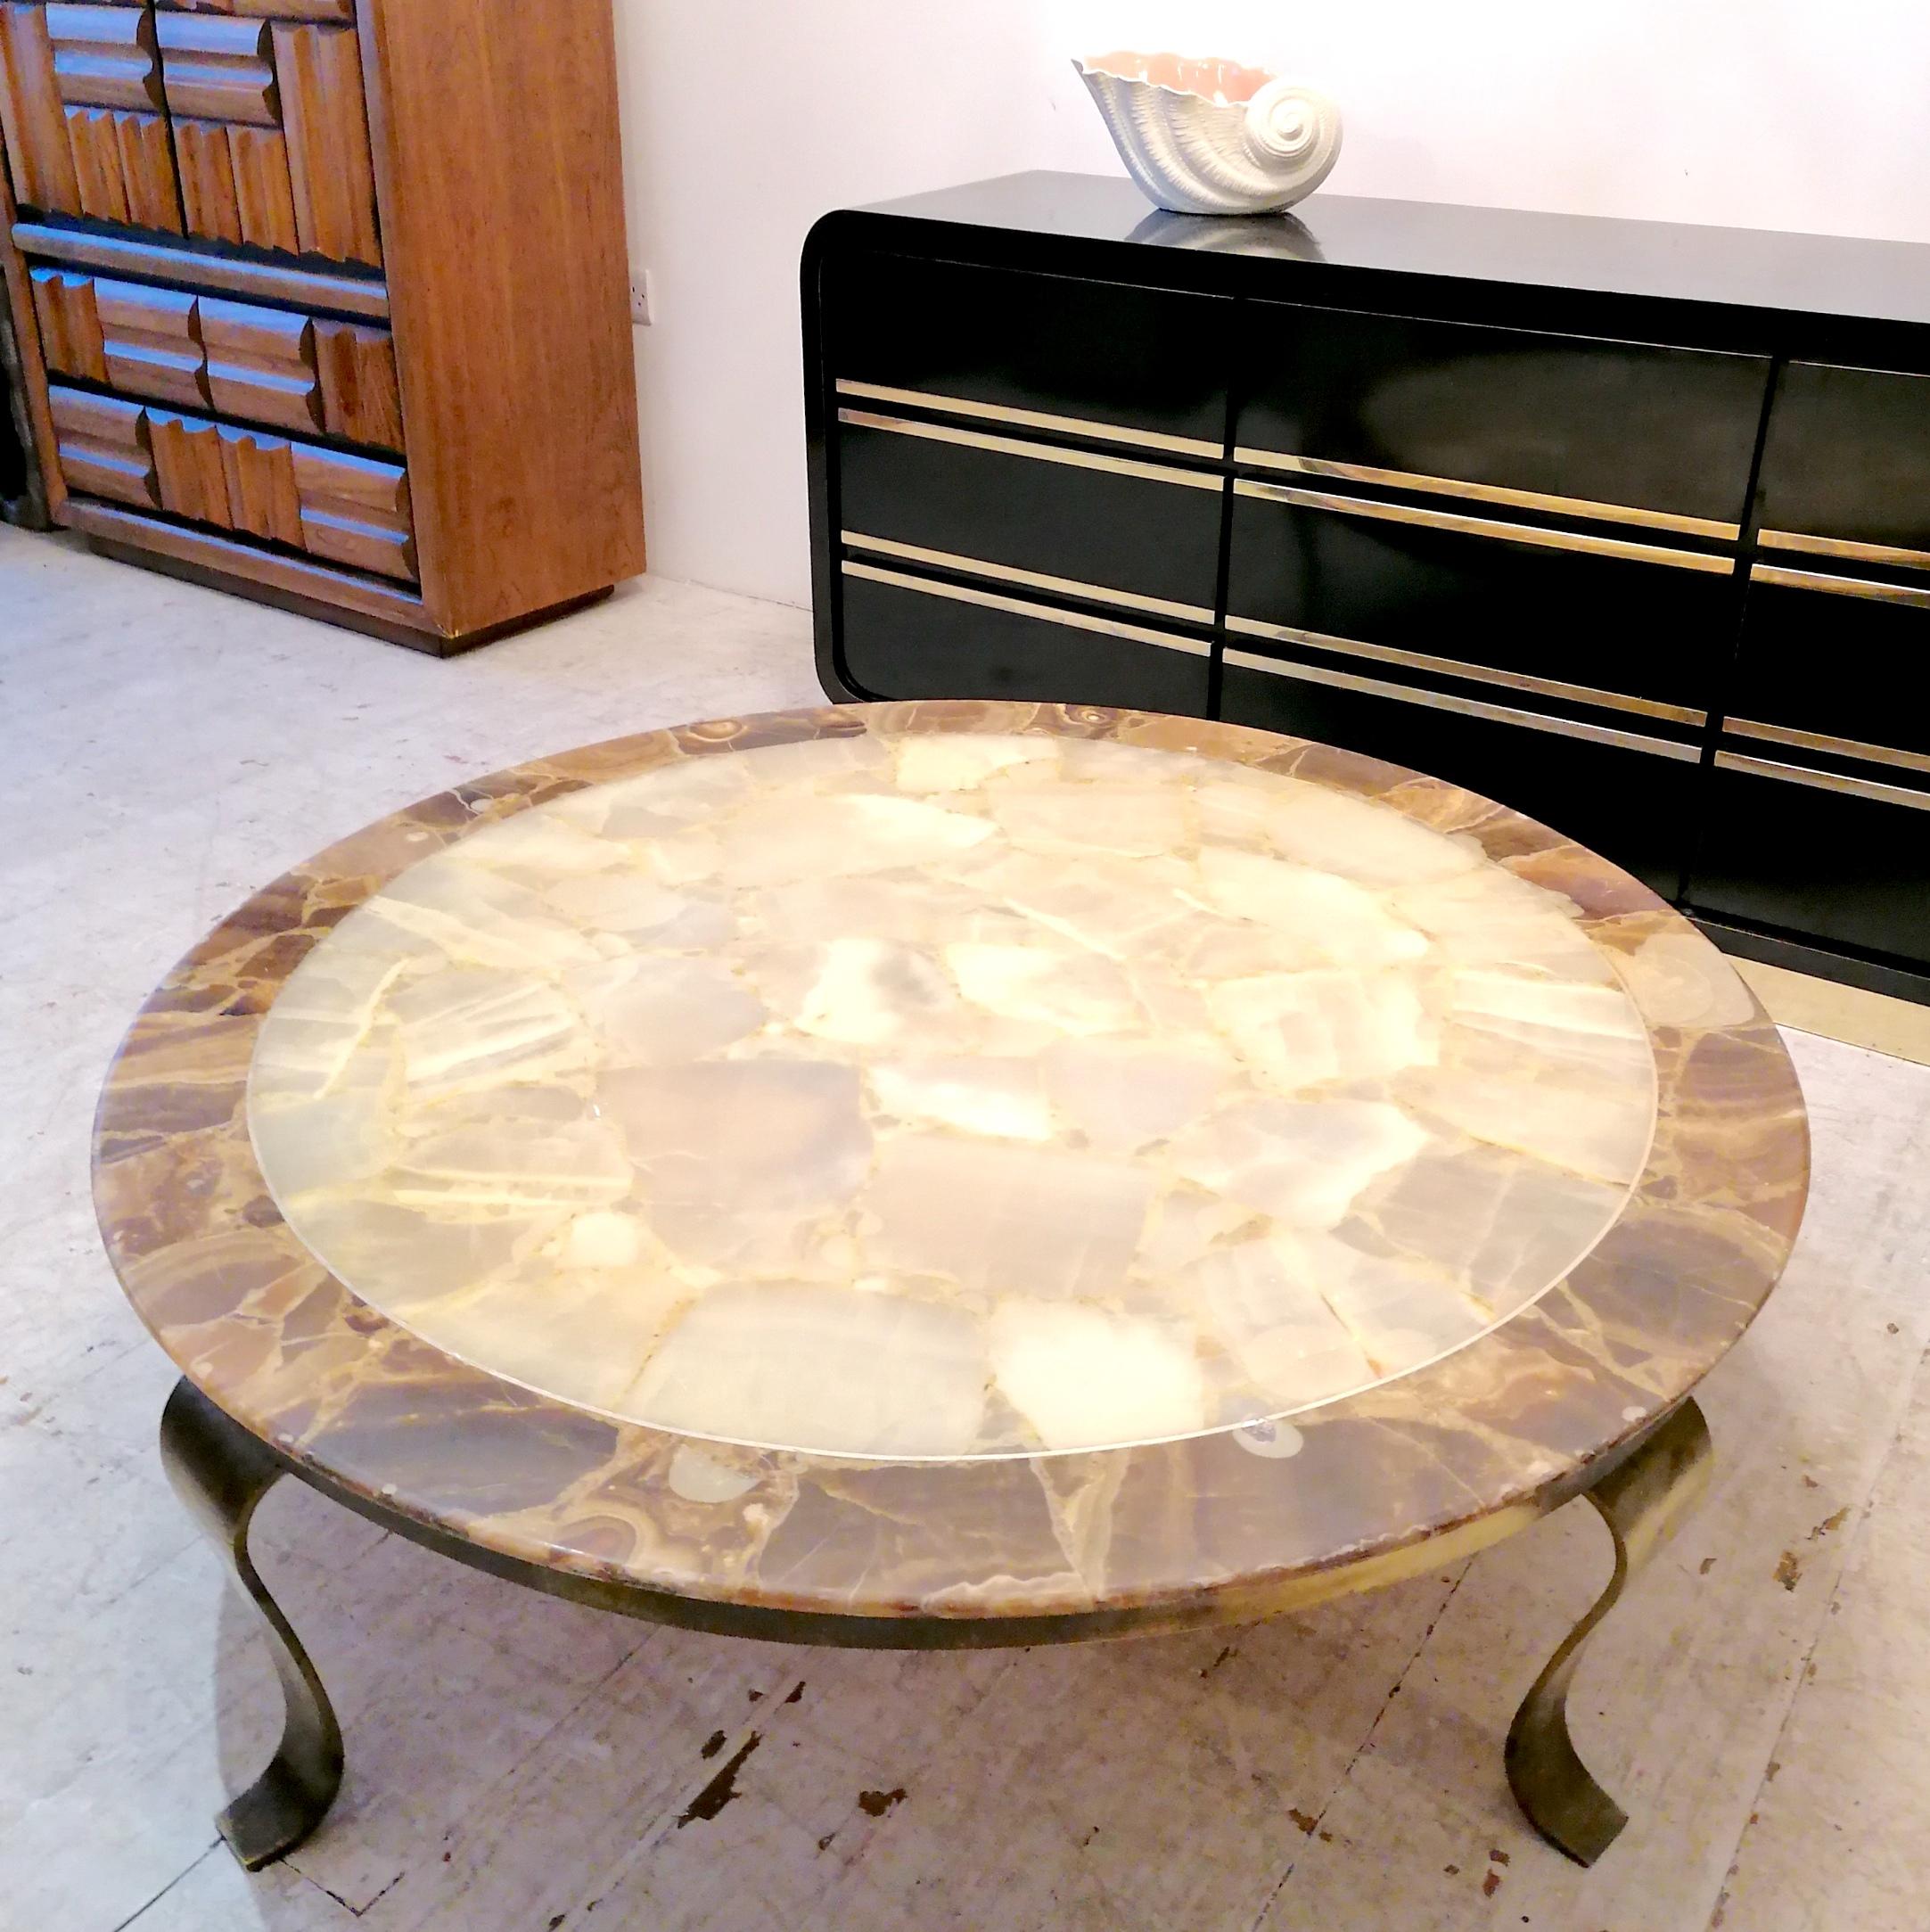 Large rare mid century Mexican lacquered onyx and brass coffee table by Roberto & Mito Block for Muller. This is the largest model, and dates to the late 1960s.
Chunks of beautifully-veined onyx , in a patchwork design, with brass inlay form the